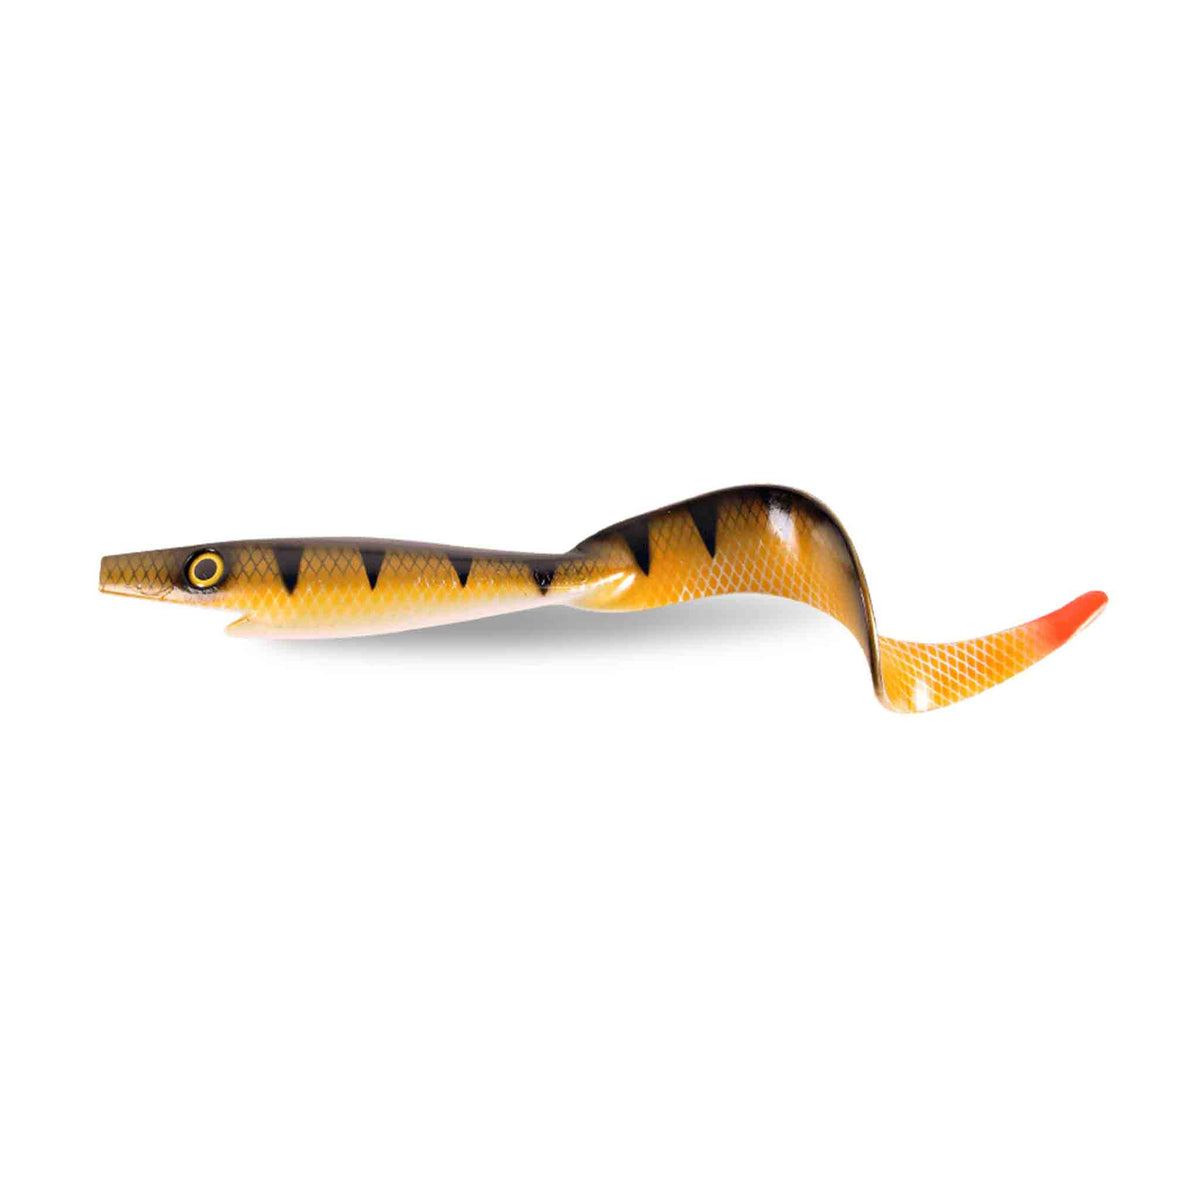 View of Swimbaits Strike Pro Giant Pig Tail Swimbait Natural Perch OB available at EZOKO Pike and Musky Shop